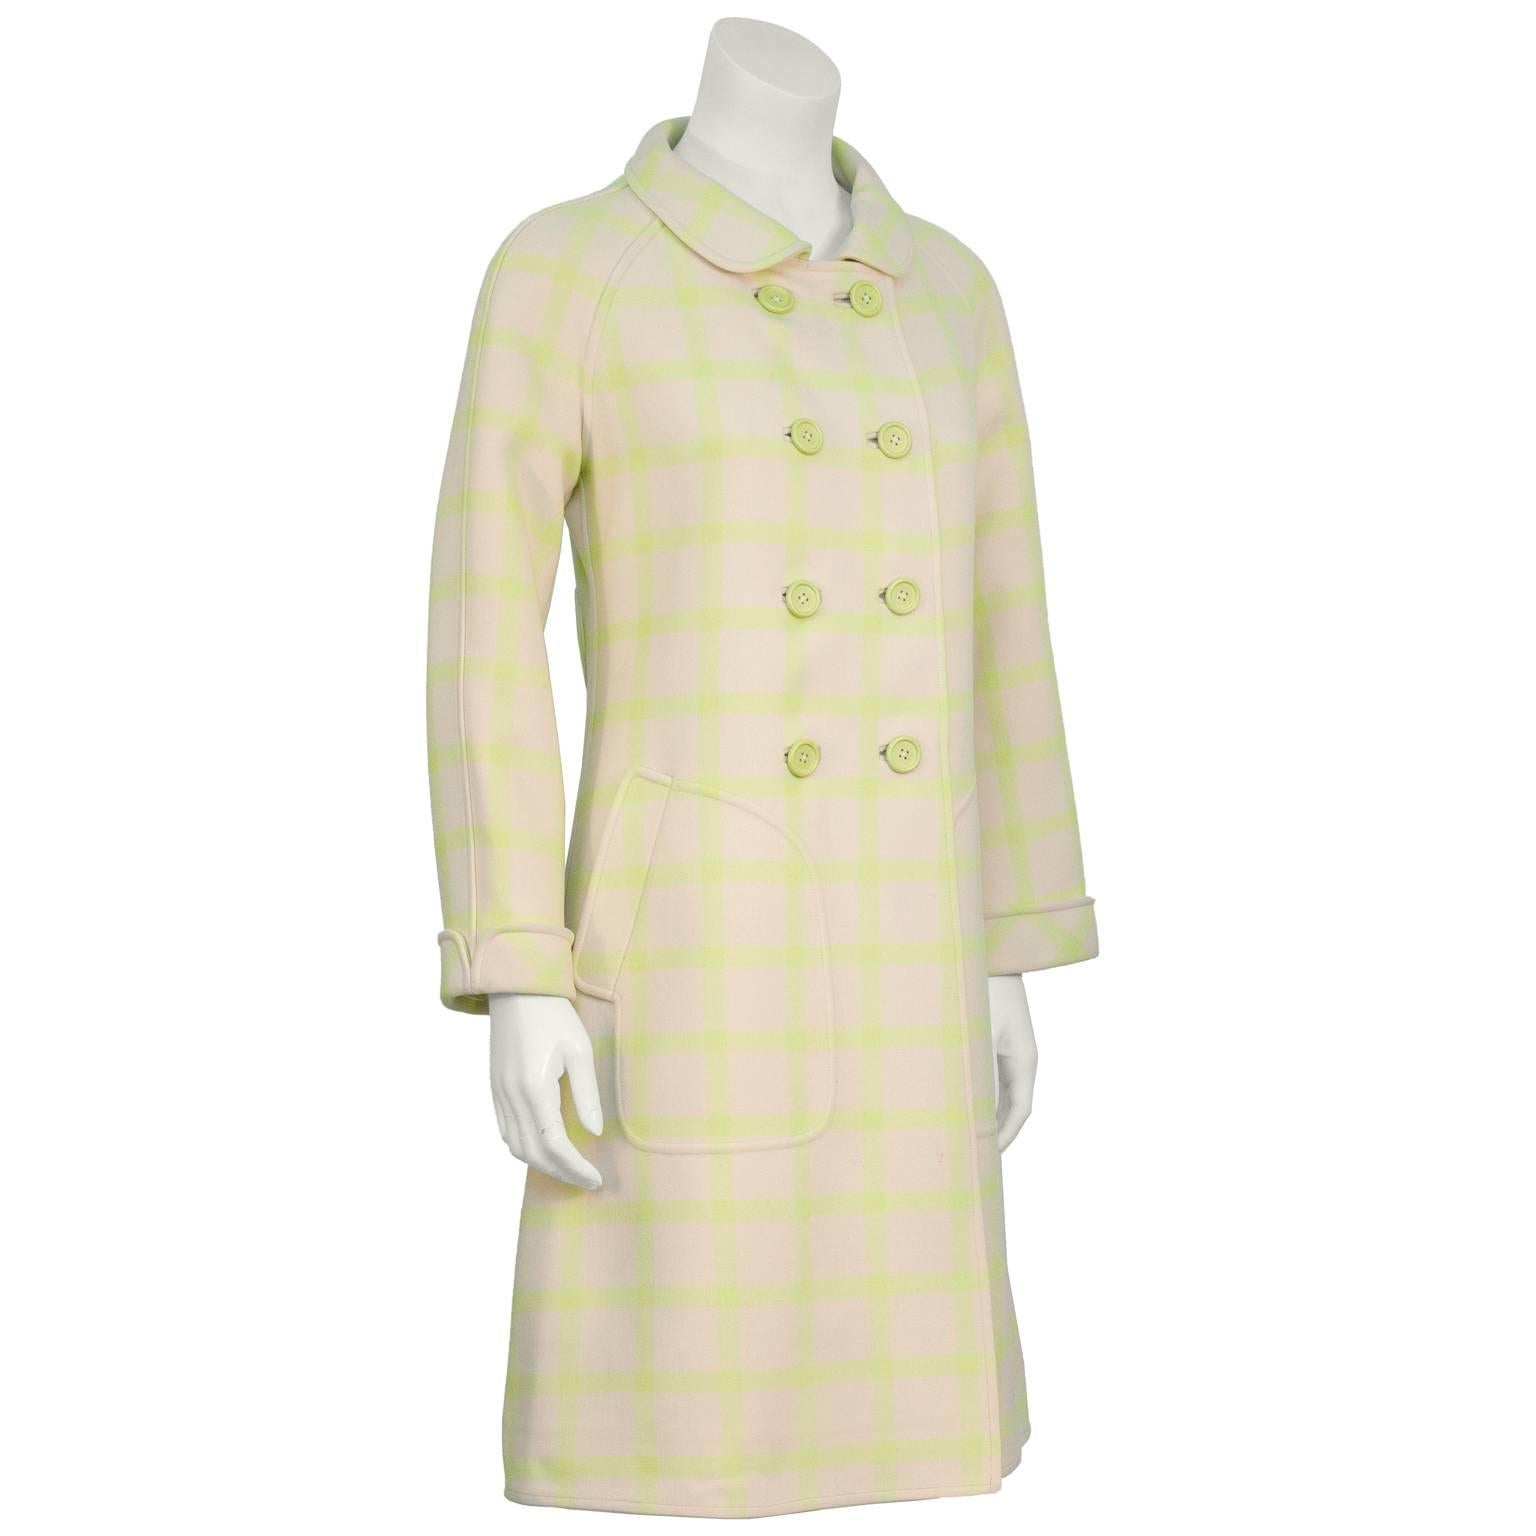 Couture Courreges 1960's beige and lime green wool double breasted coat with a windowpane pattern. The coat features a Peter Pan collar, stitched cargo flap pockets at the hips, and matching lime green buttons up the front. The back is finished with